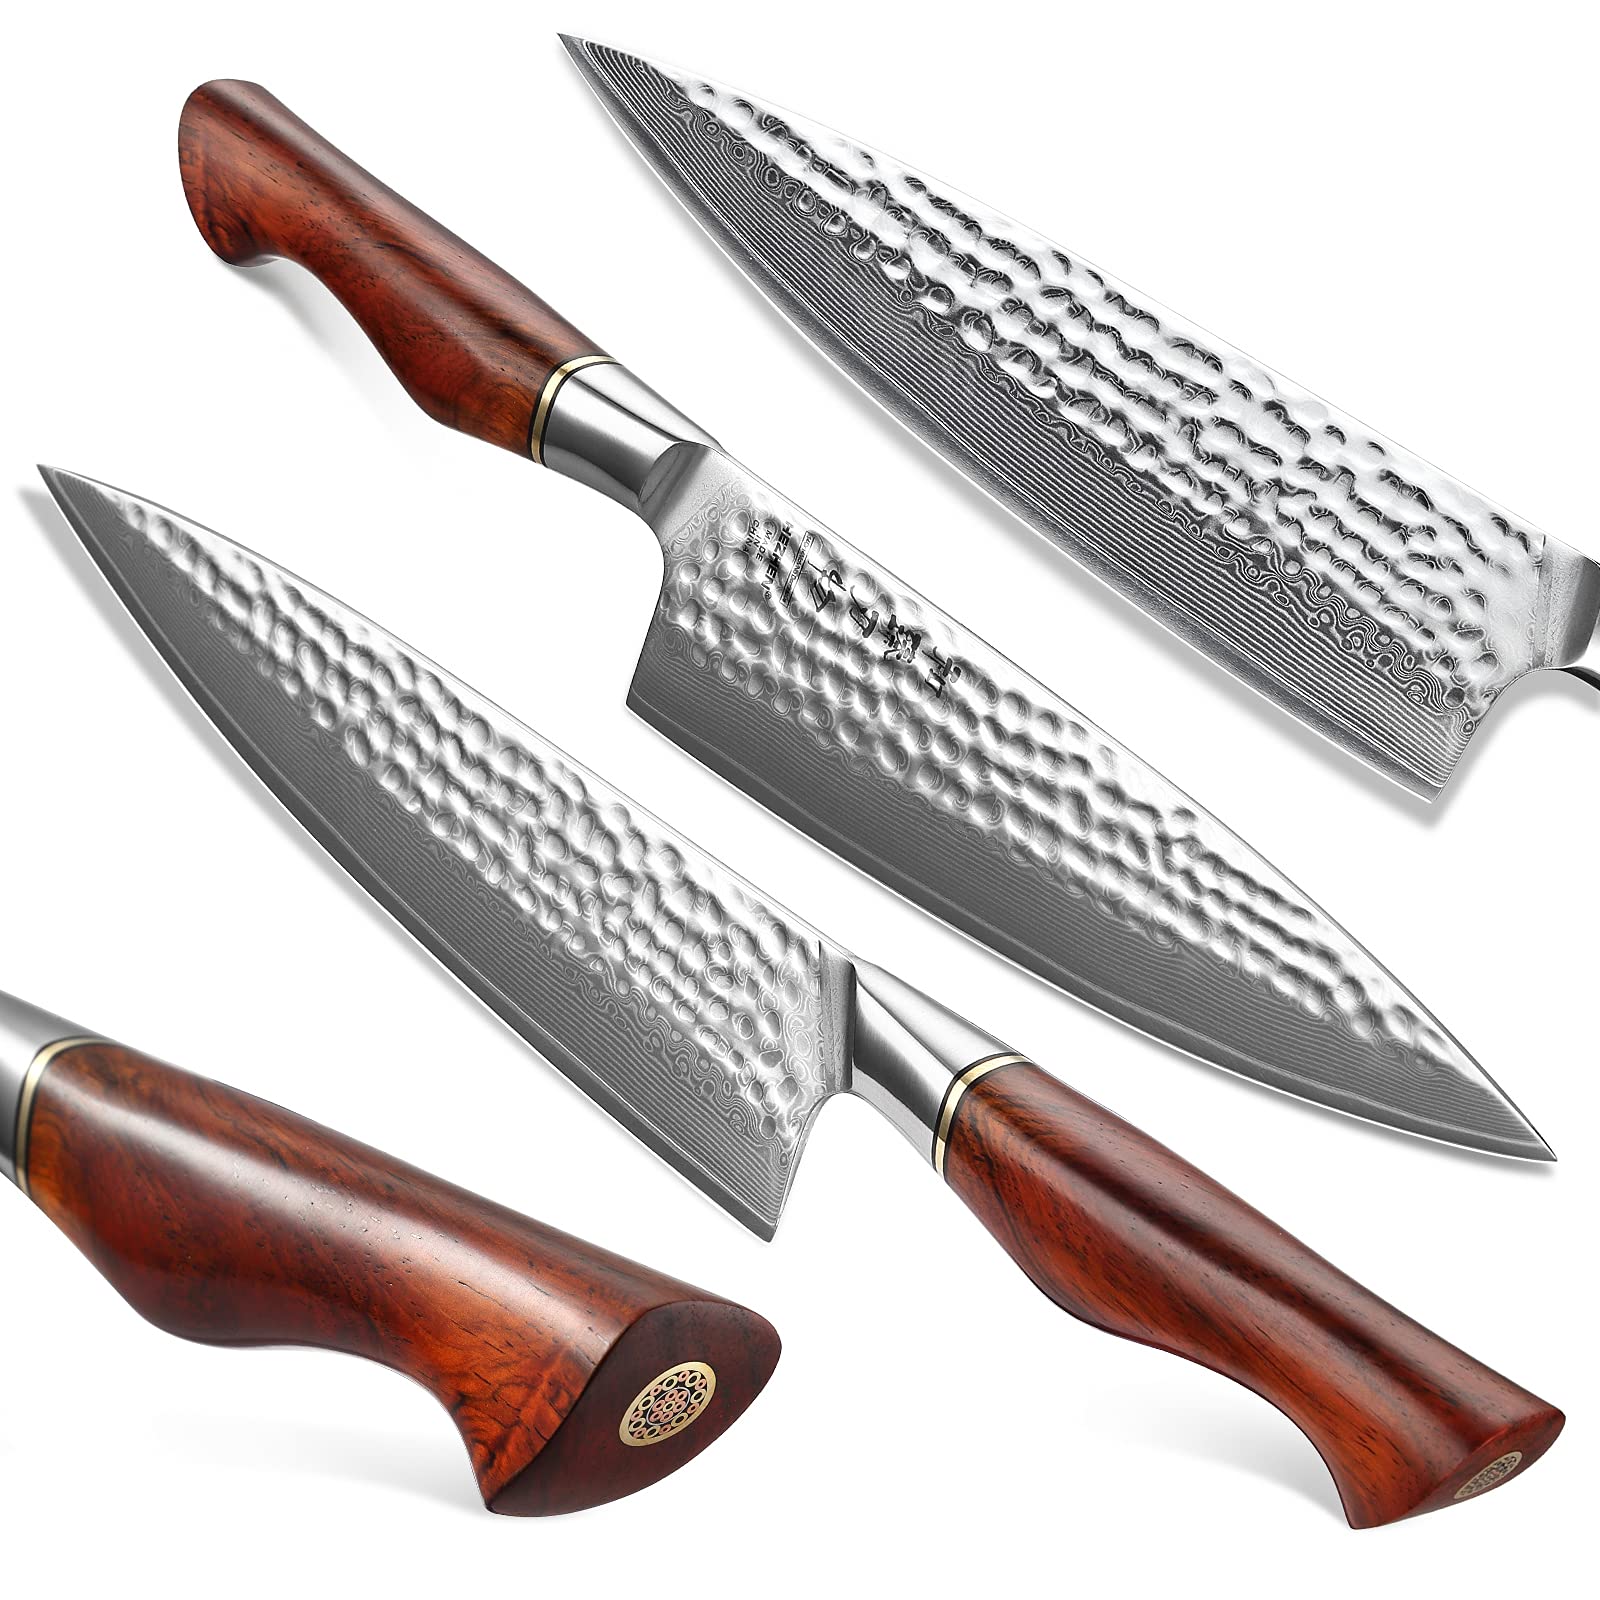 HEZHEN Damascus Knife Set 5PCS,Premium Powder Steel Forged Hammered Pattern, Rosewood Handle, Home Cooking Kitchen Knives